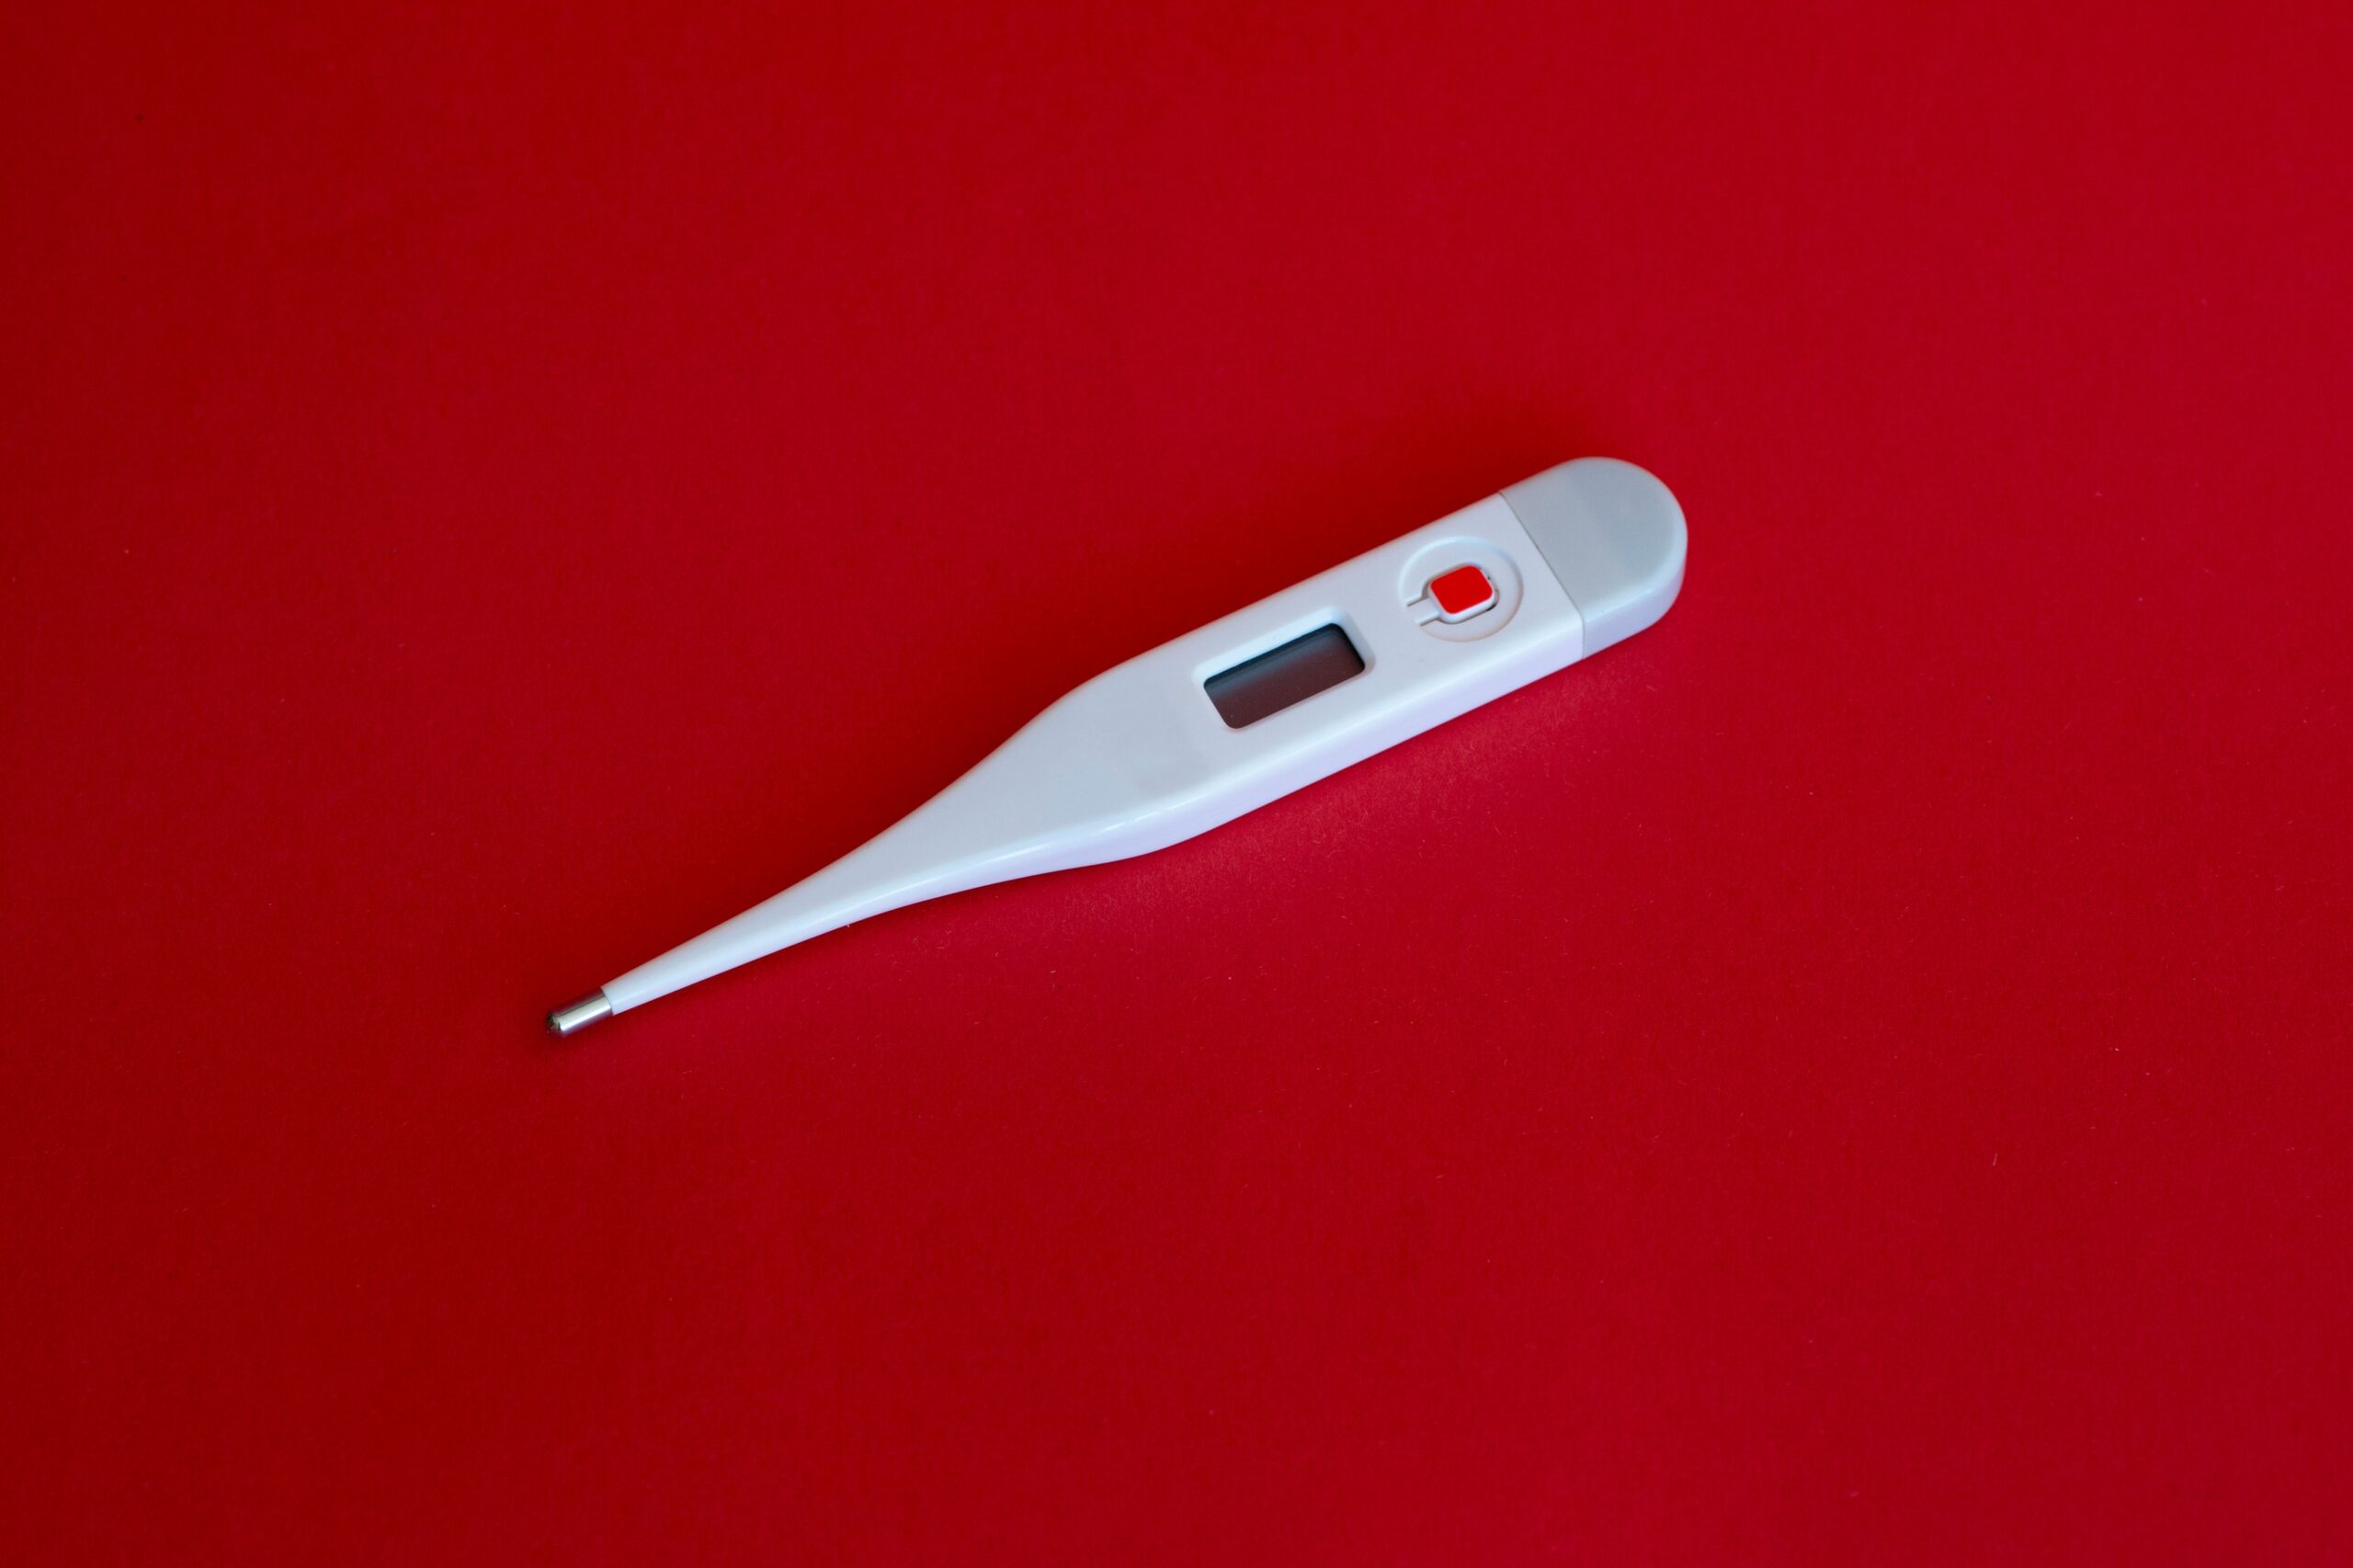 white thermometer on red surface